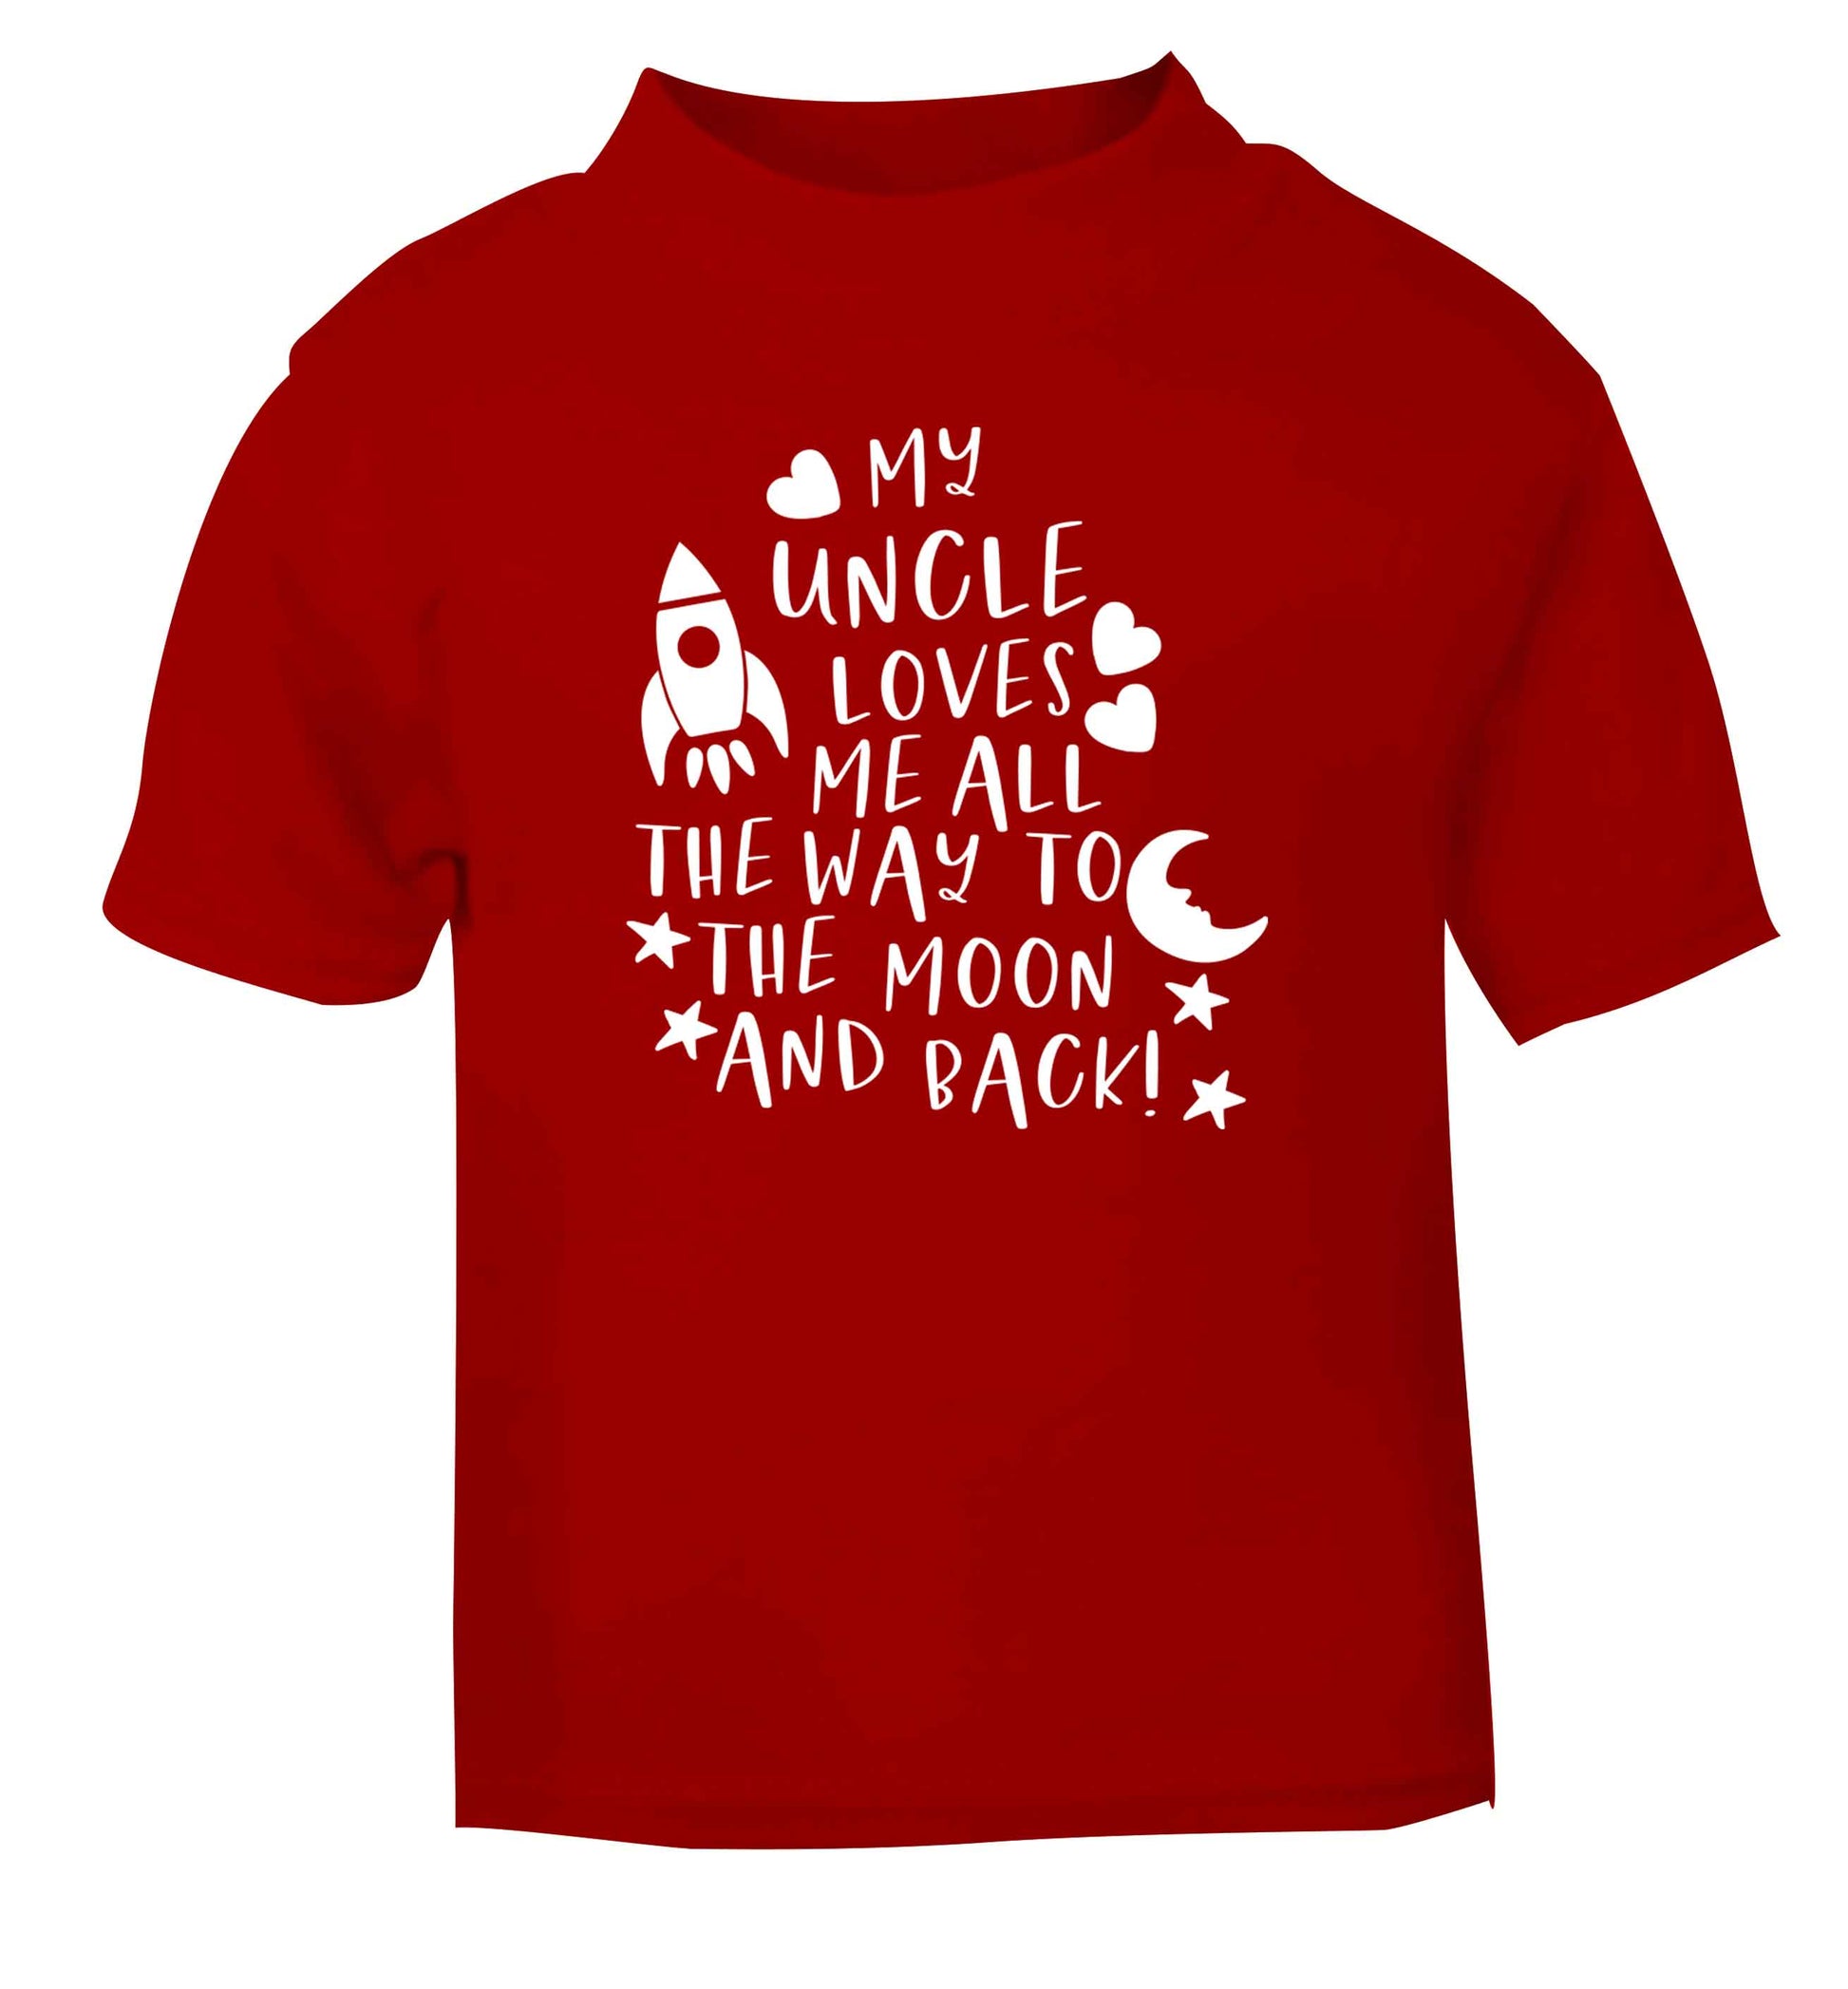 My uncle loves me all the way to the moon and back red Baby Toddler Tshirt 2 Years